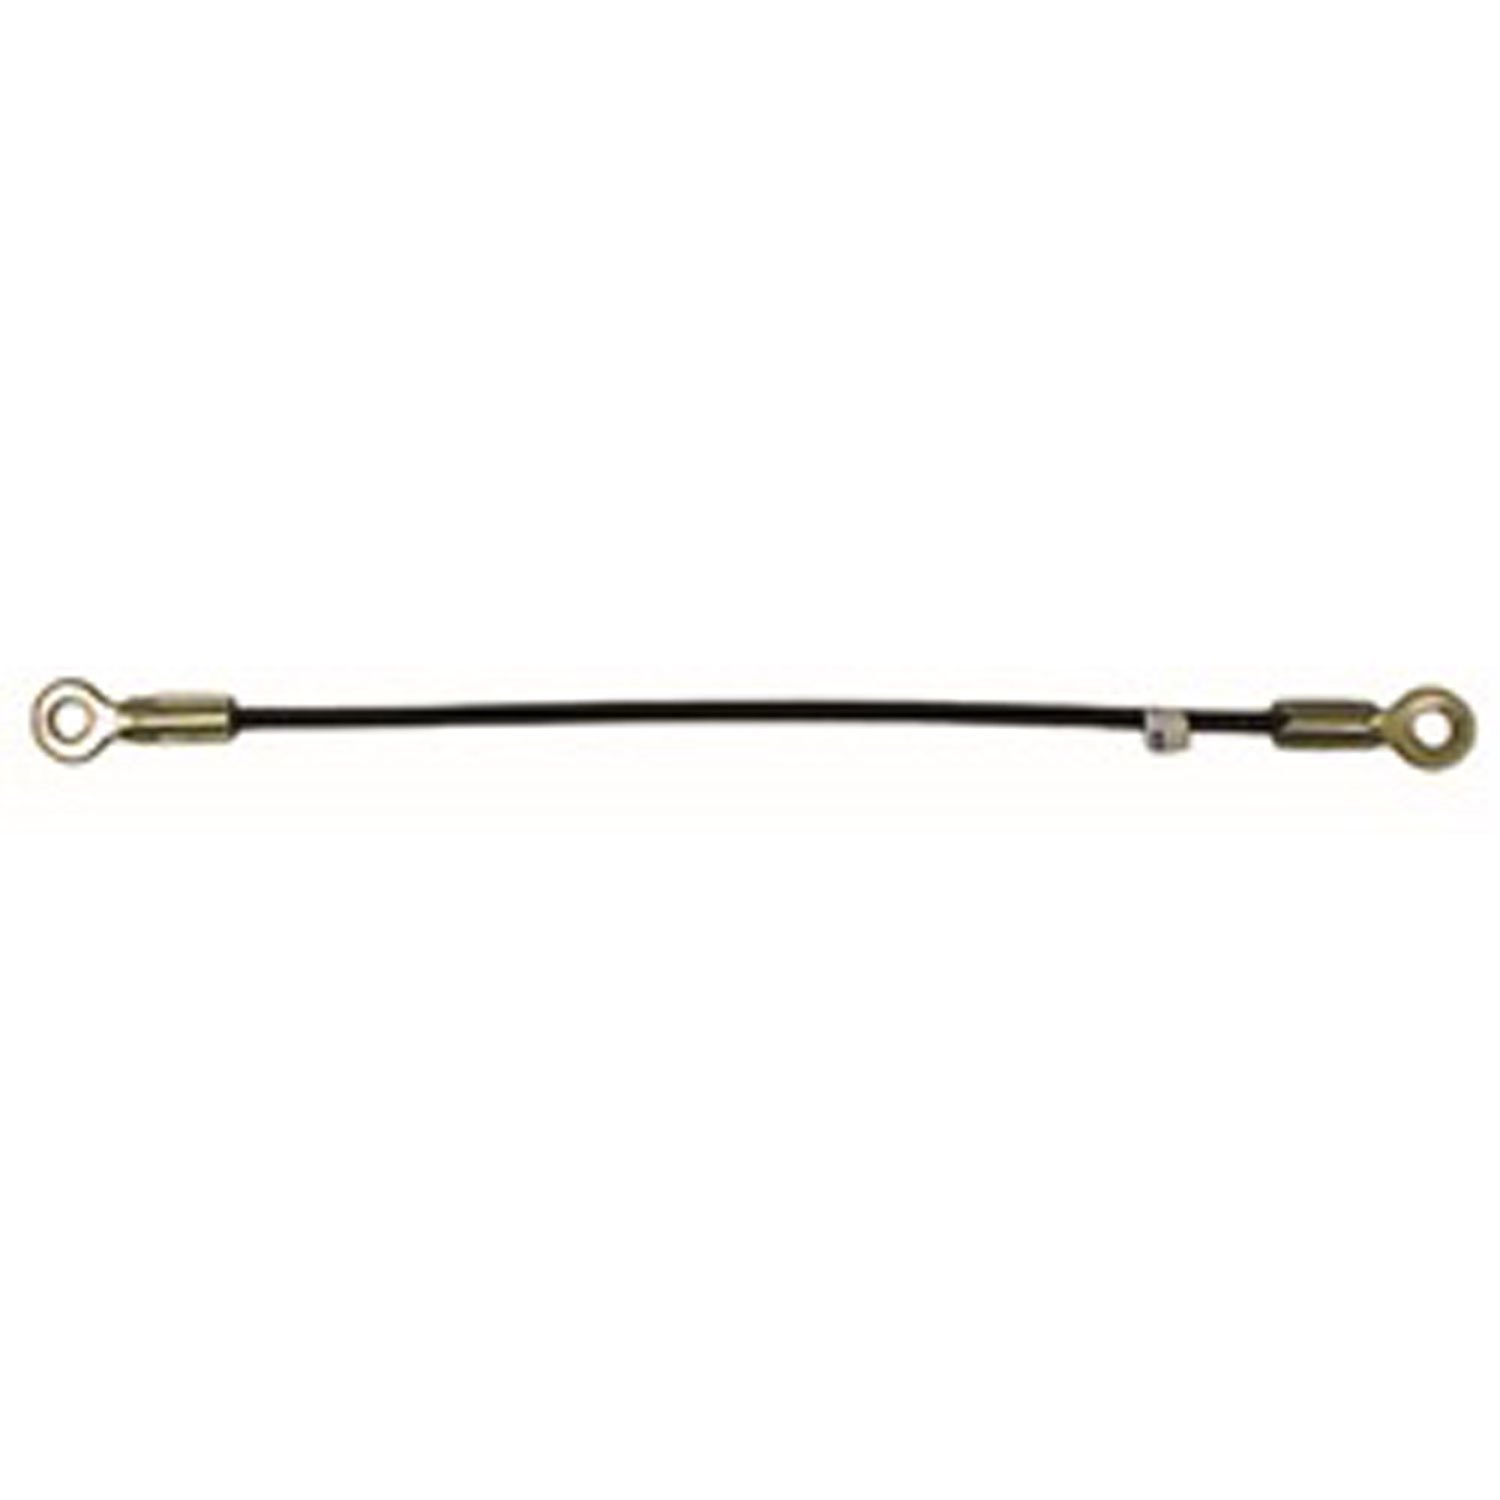 Replacement tailgate cable from Omix-ADA, Fits 76-86 Jeep CJ7 and 81-86 CJ8. Two required per tailgate.